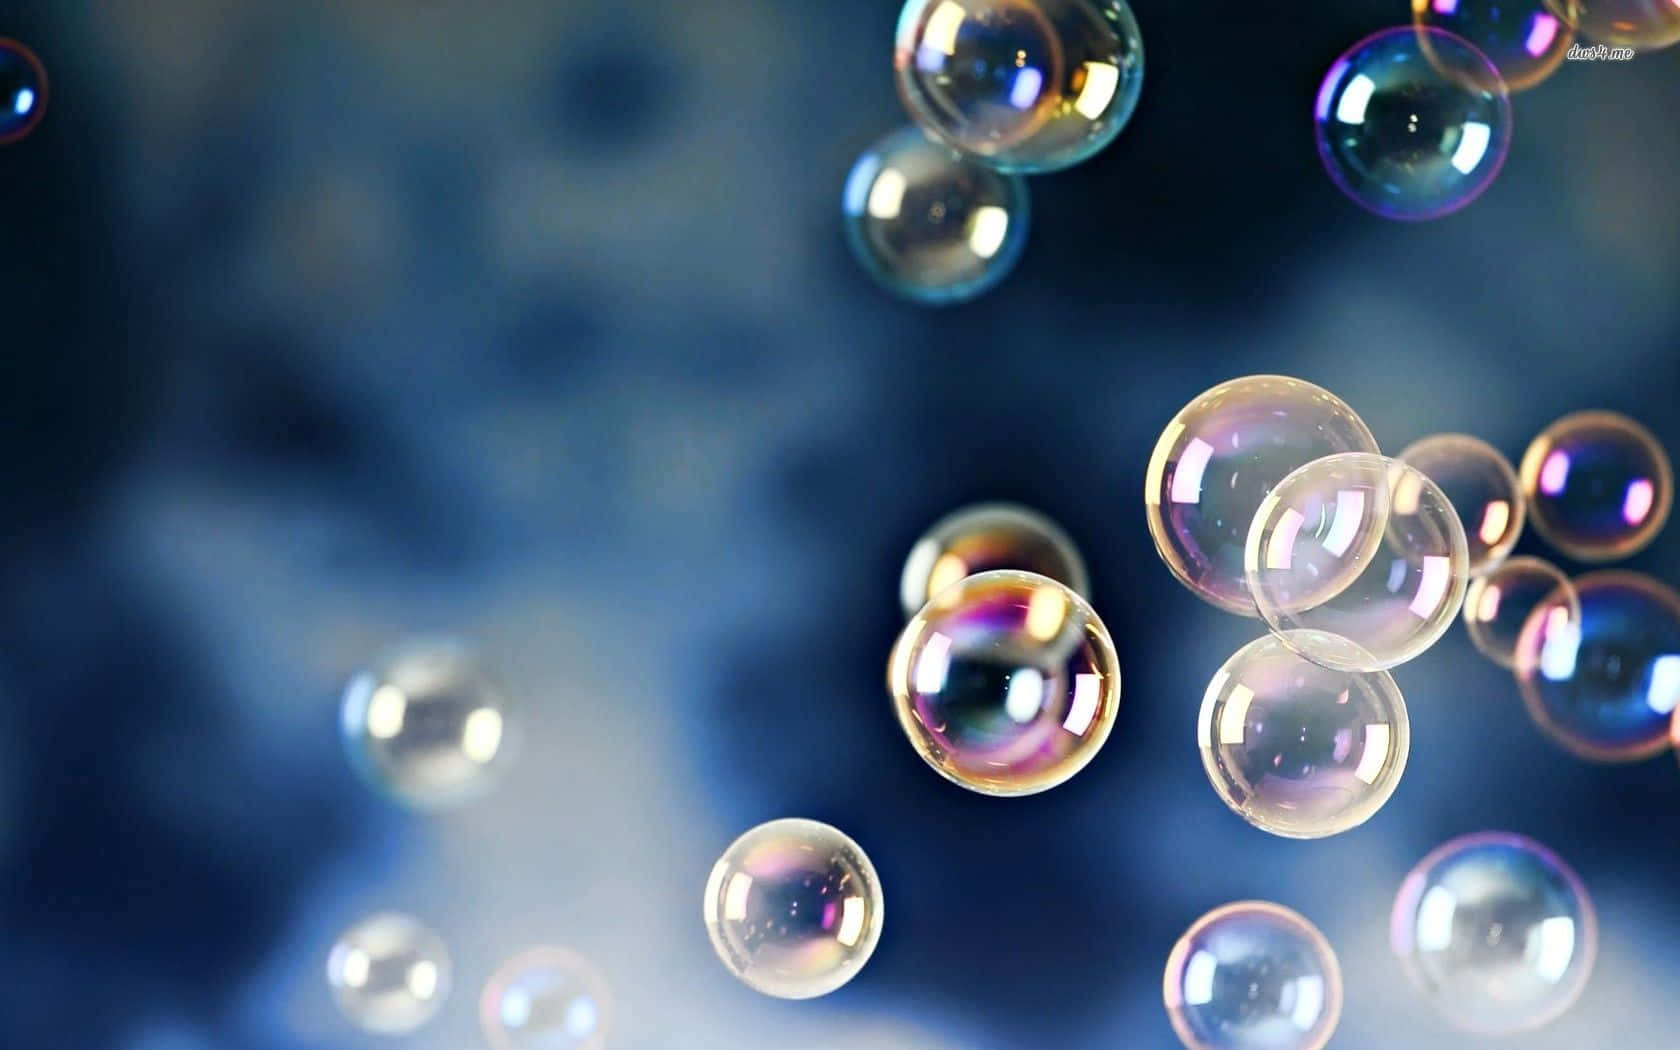 Download wallpaper 1920x1080 drops, wet, glass, surface, transparent full  hd, hdtv, fhd, 1080p hd background